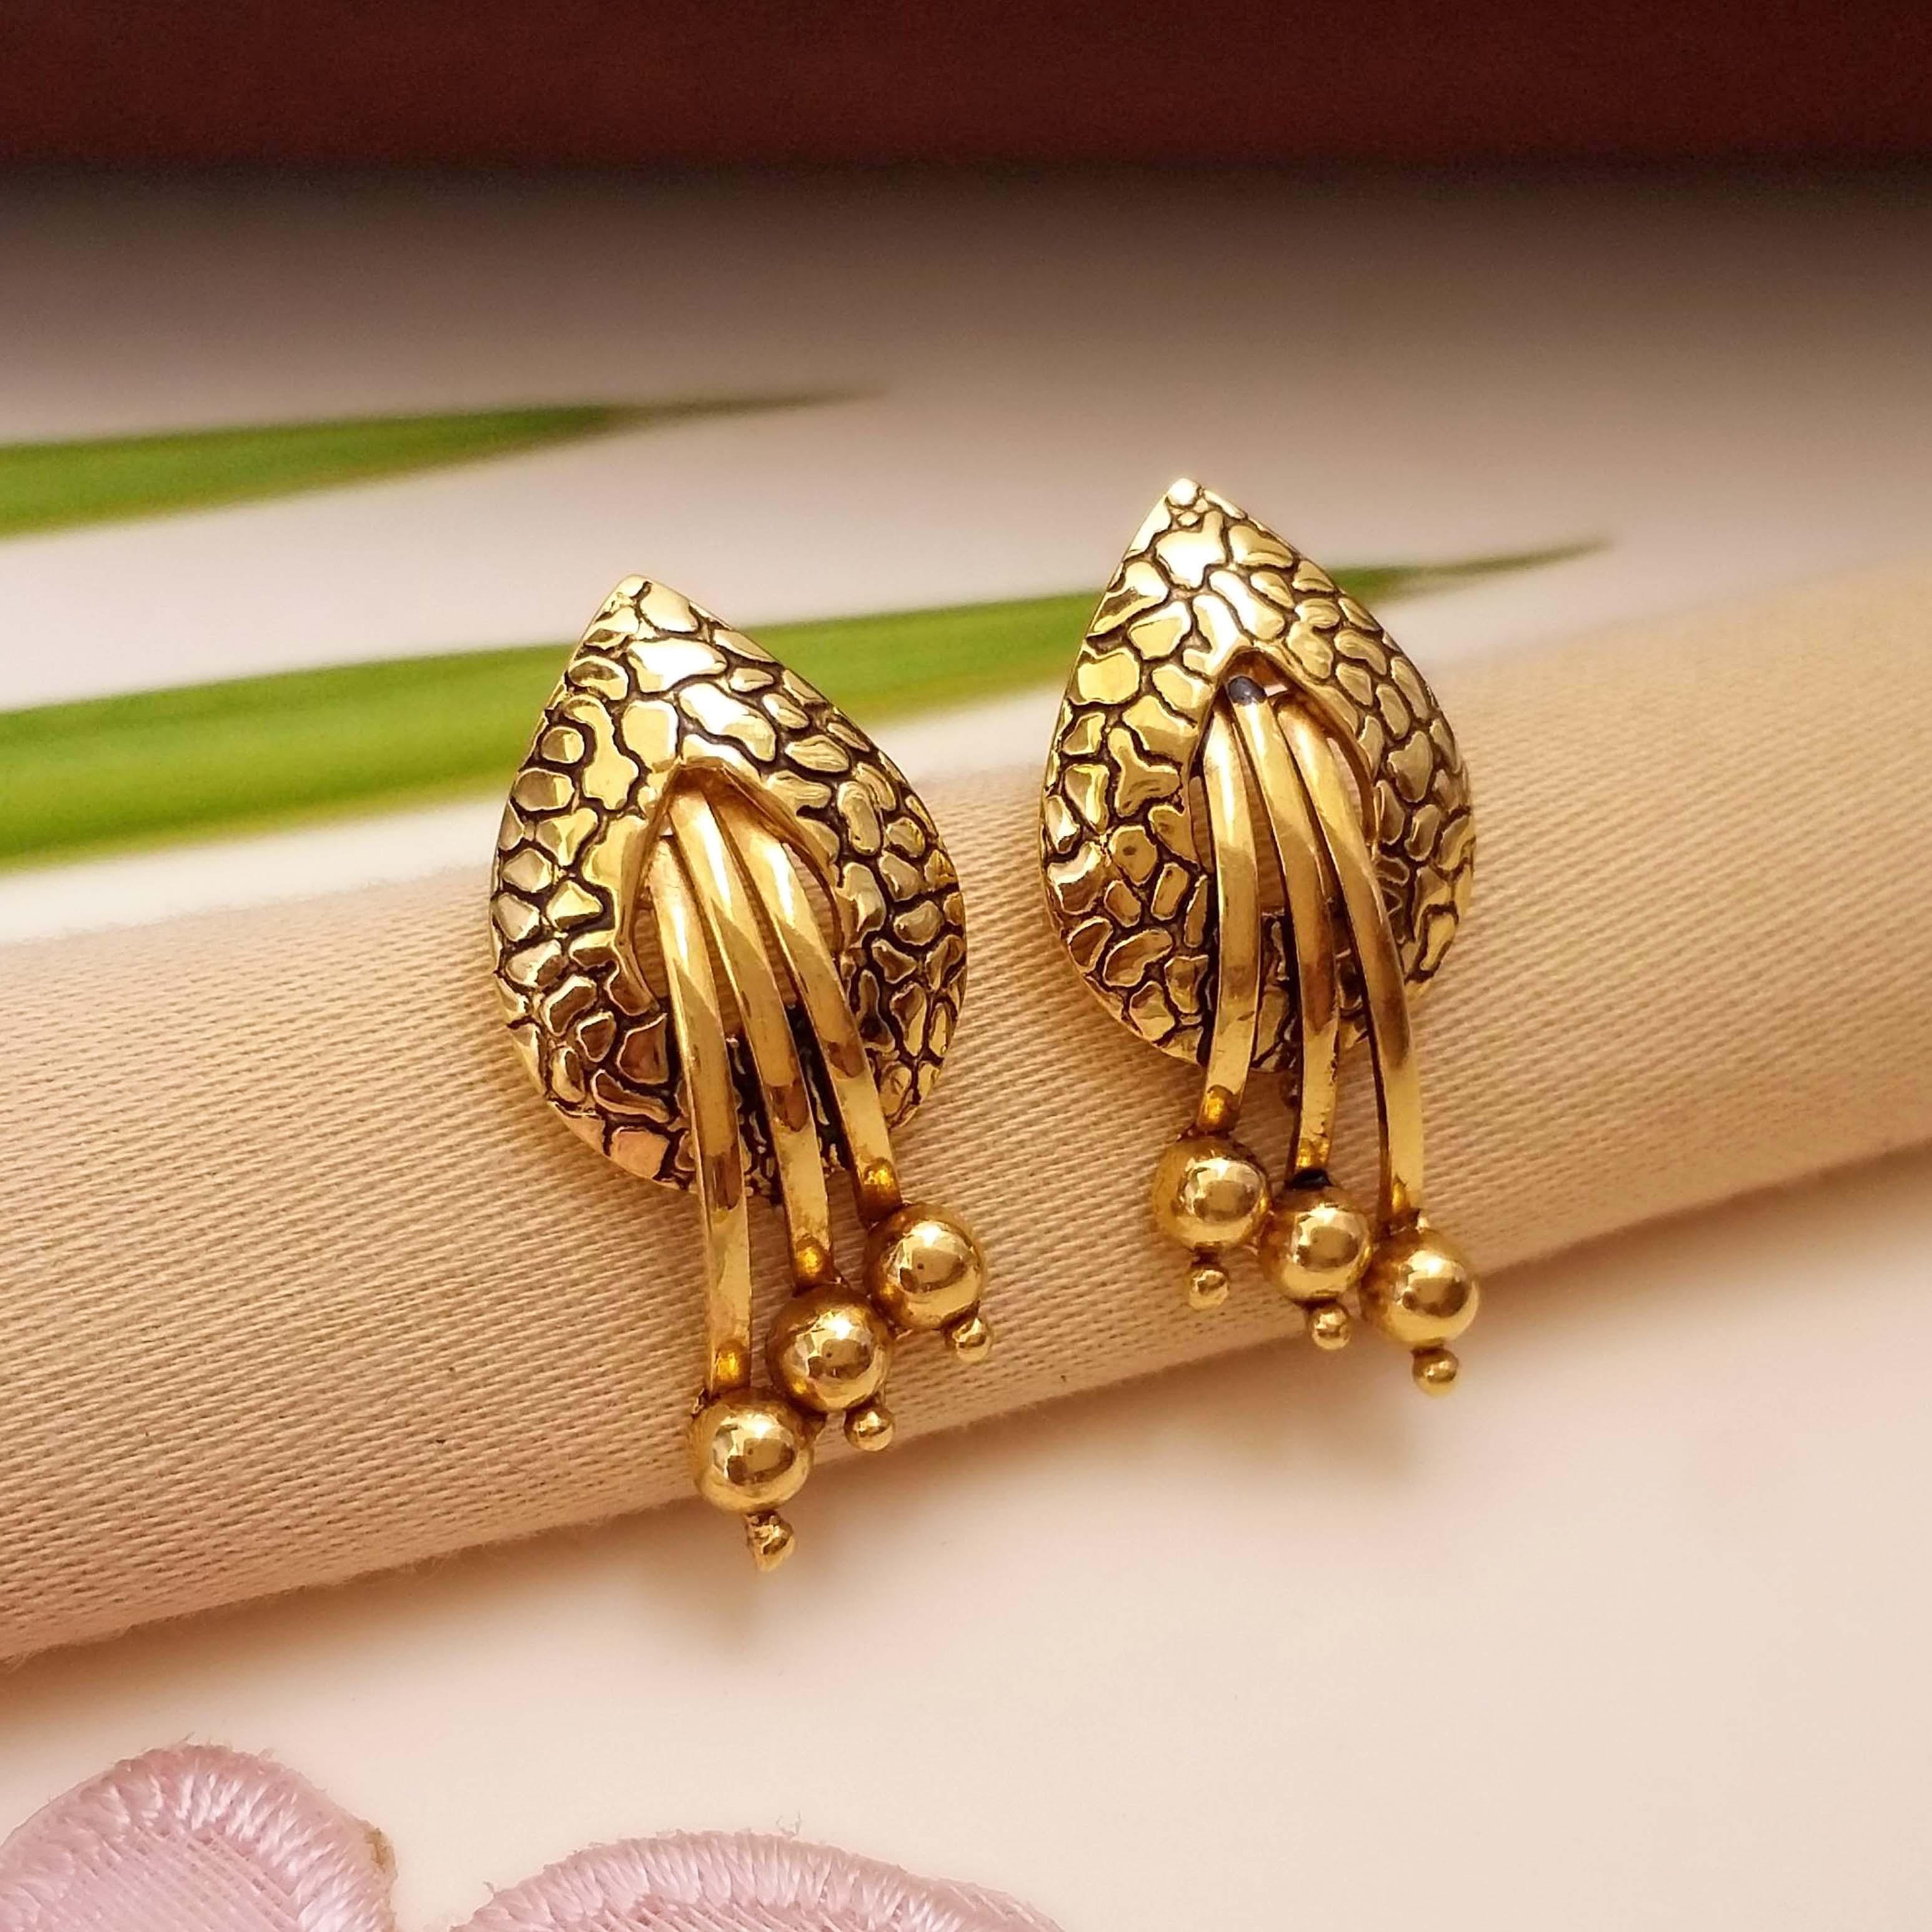 Buy Panache Gold Earrings 22 KT yellow gold (4.35 gm). At Best Price In India. Check Earrings New Designs At Giriraj Jewellers. BIS Care, Hallmark, 100% Certified | Trust & Quality of Giriraj Jewellers India | latest design of gold earrings | antique gold earrings design | 22k gold antique earrings